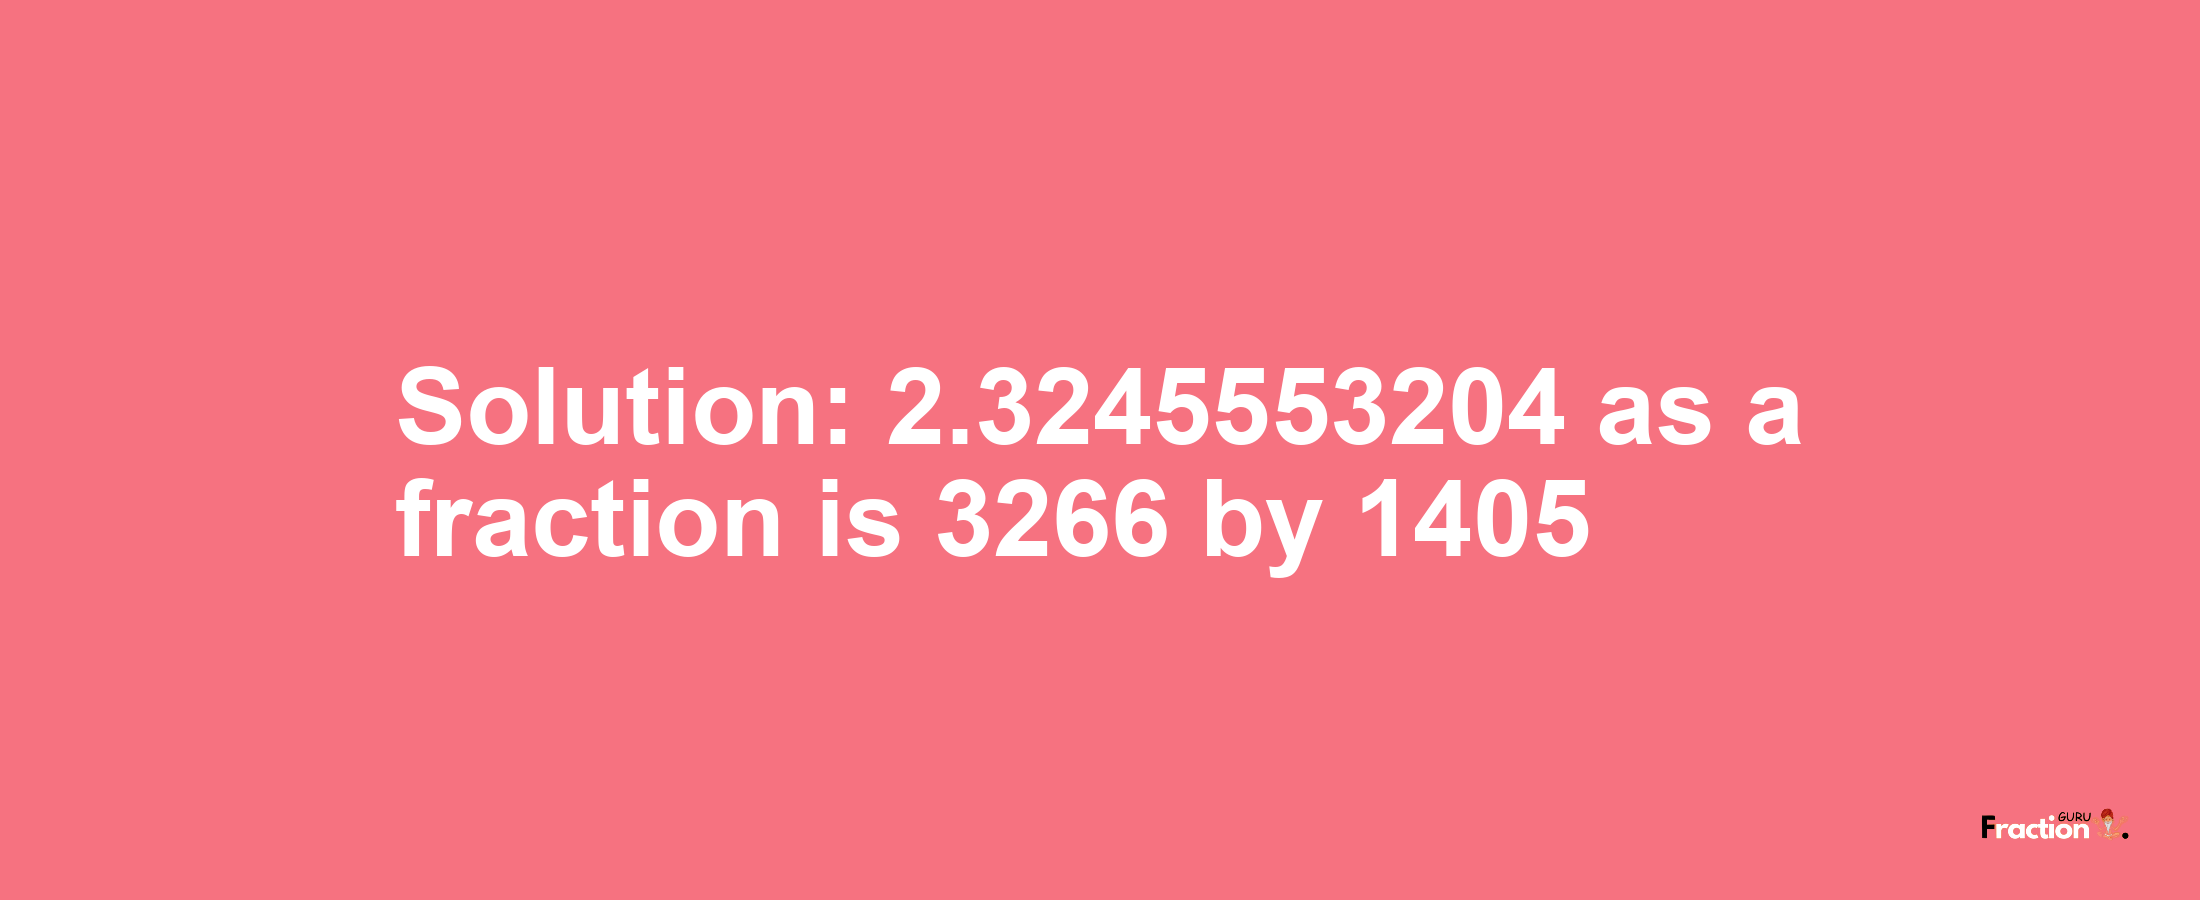 Solution:2.3245553204 as a fraction is 3266/1405